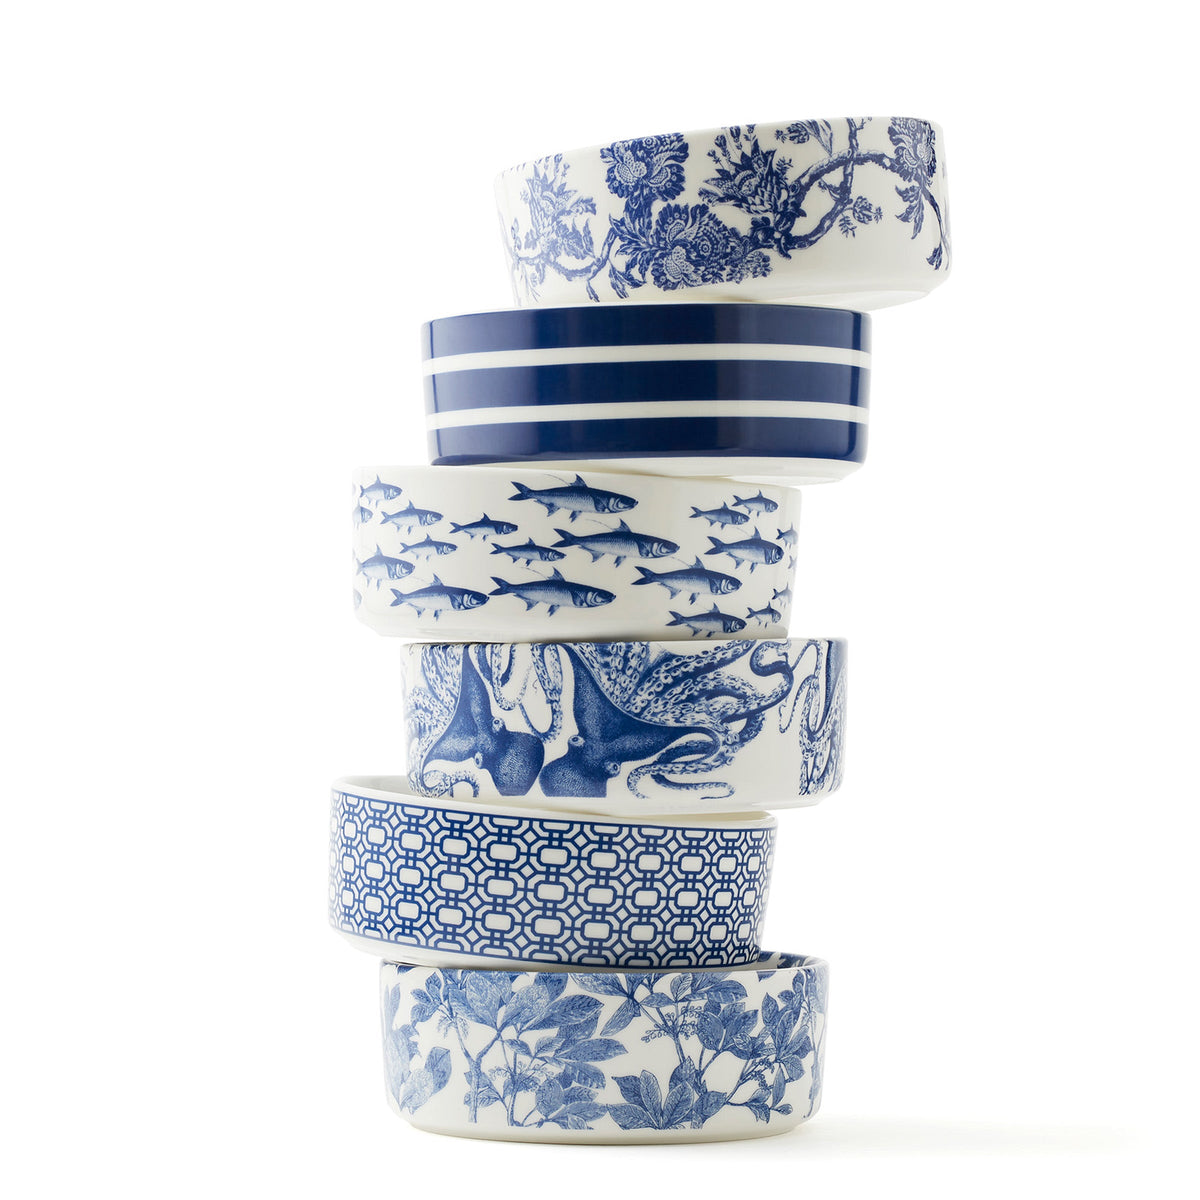 A stack of Beach Towel Stripe Large Pet Bowls, commonly used as dinnerware, by Caskata.